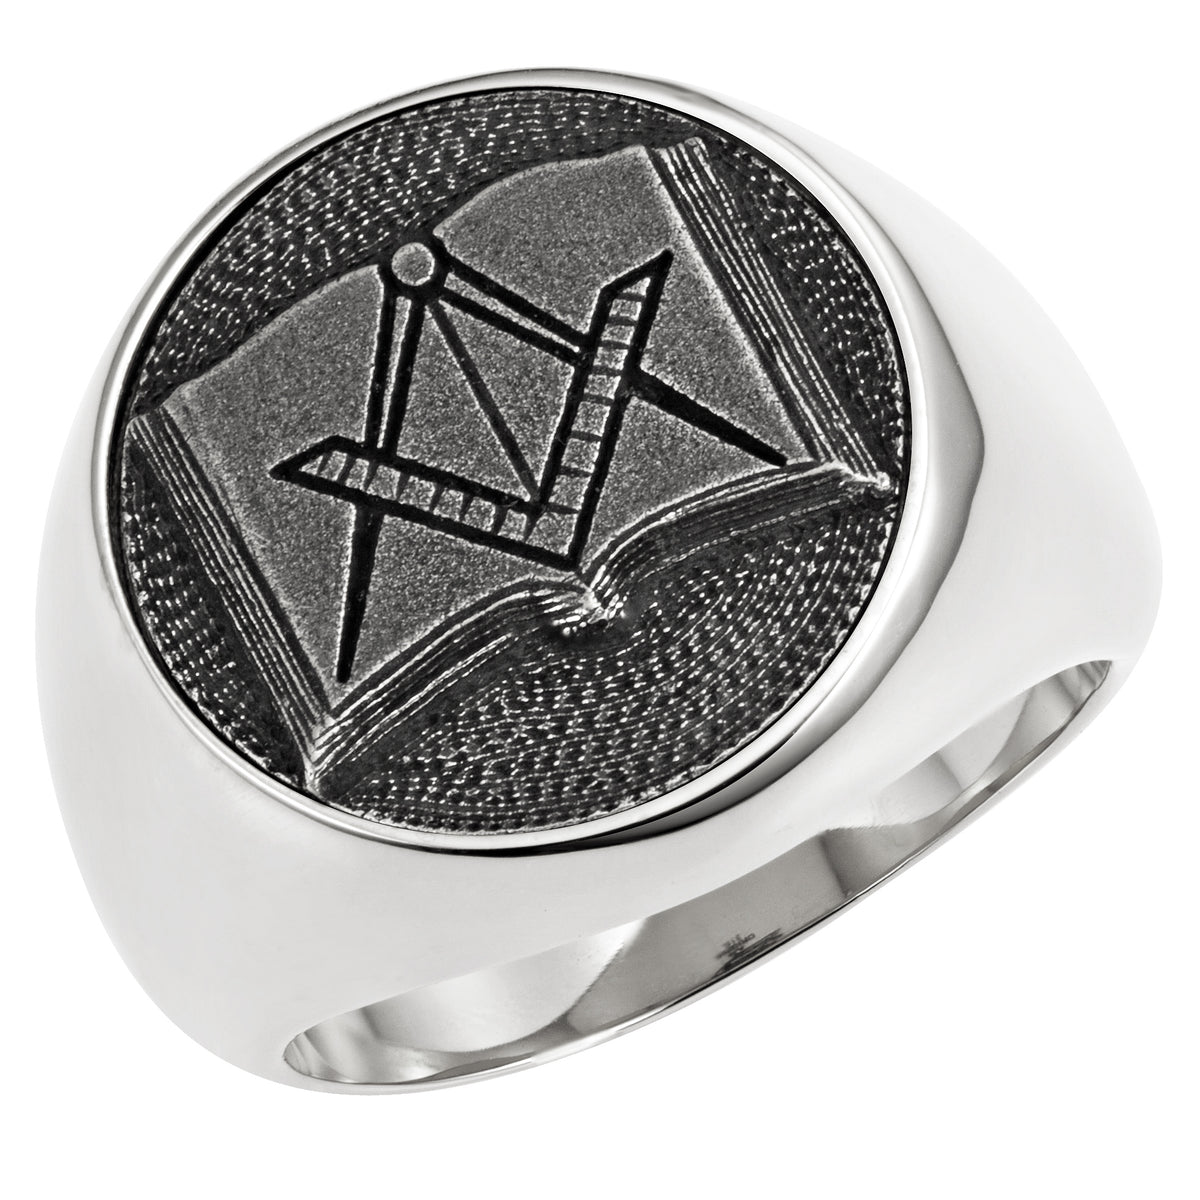 Stainless Steel Masonic Ring with Emblem and Open Bible